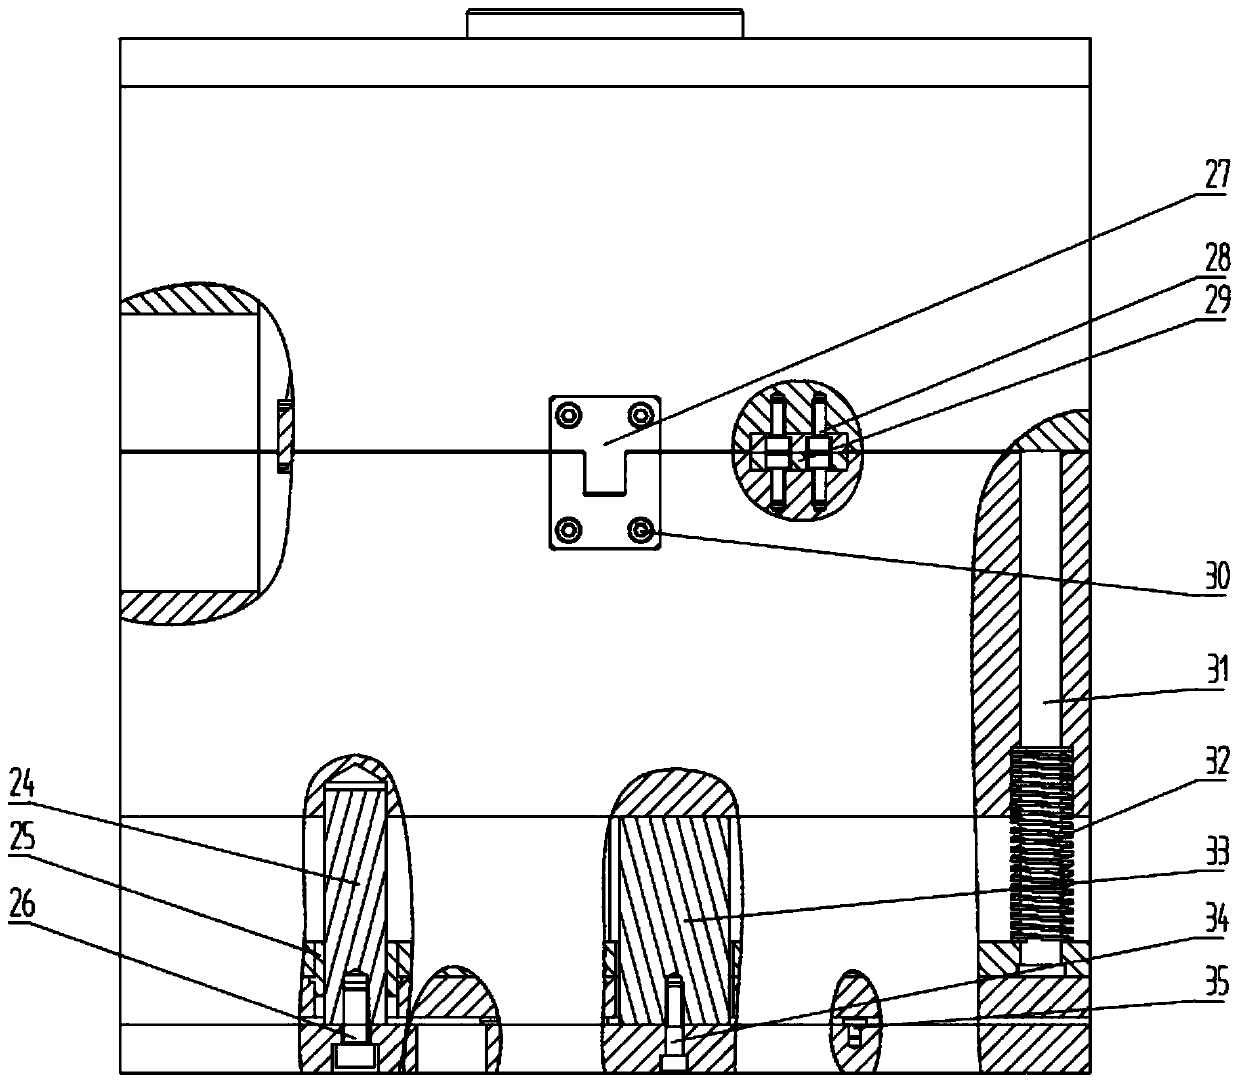 A multi-directional core-pulling injection mold for spherical skeleton parts